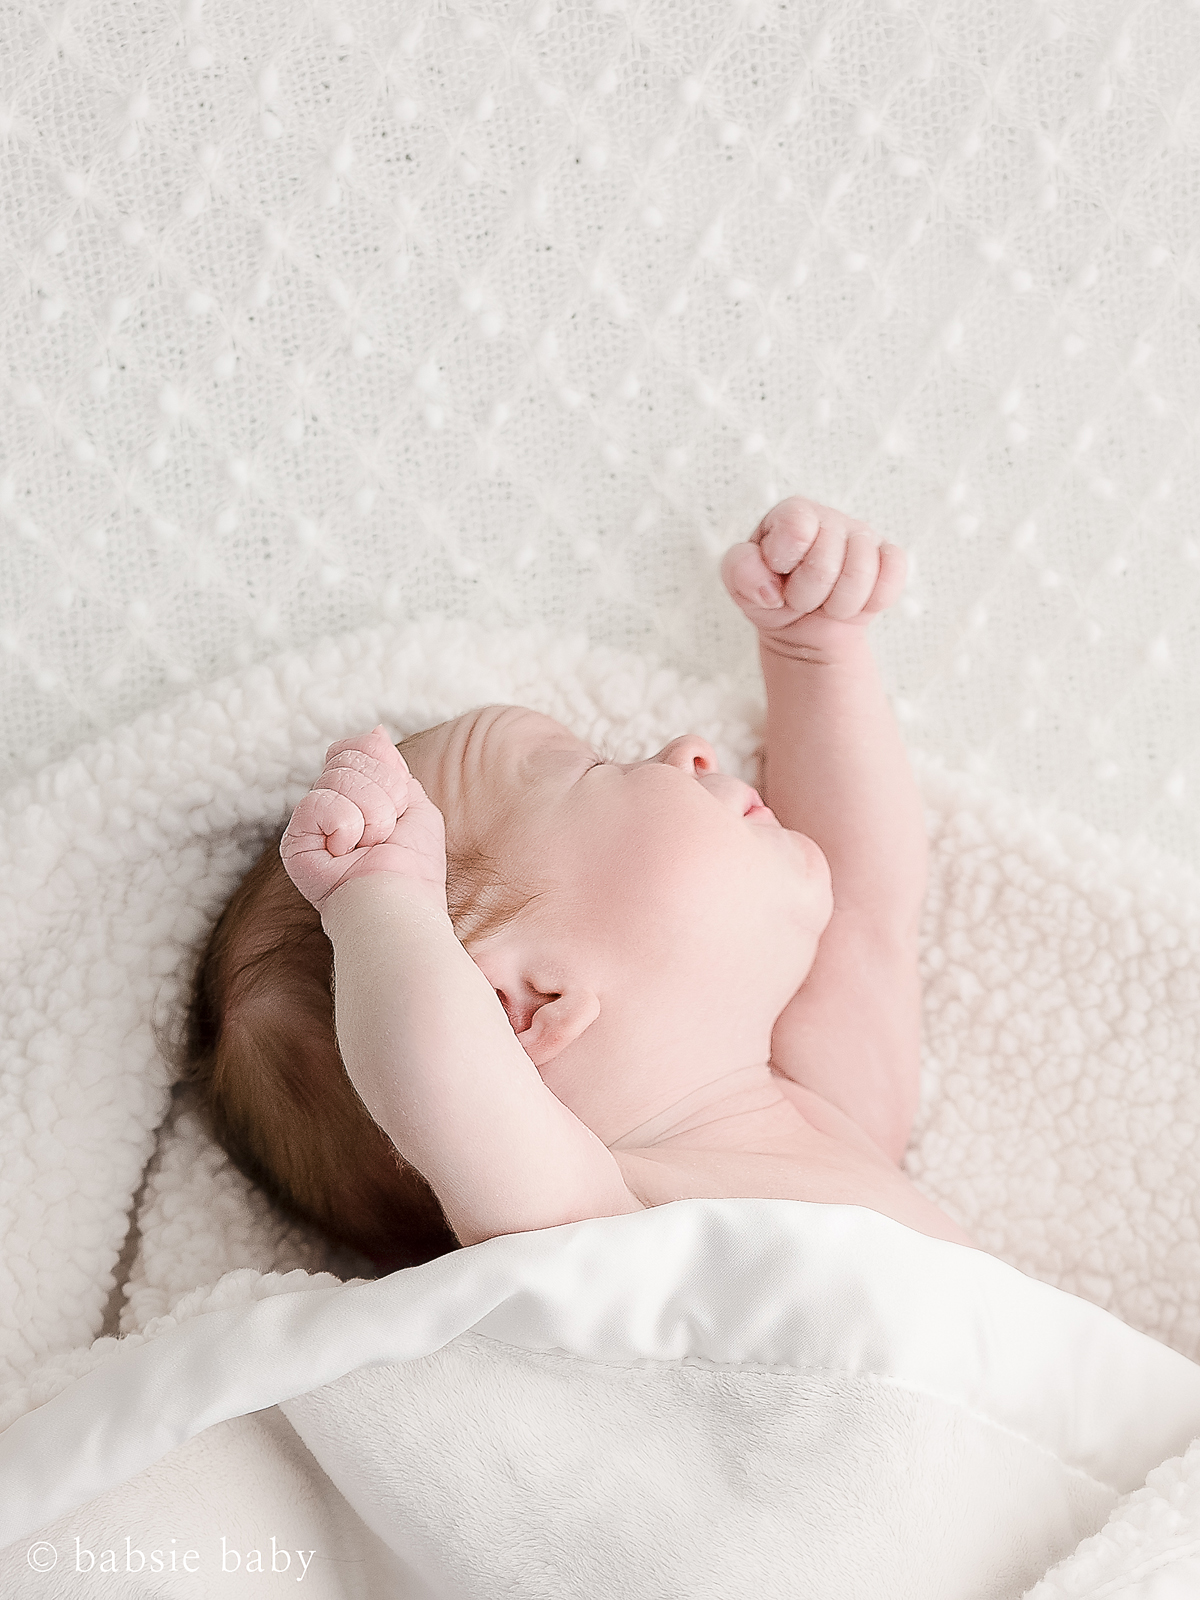 Baby girl stretching her arms at a newborn session.